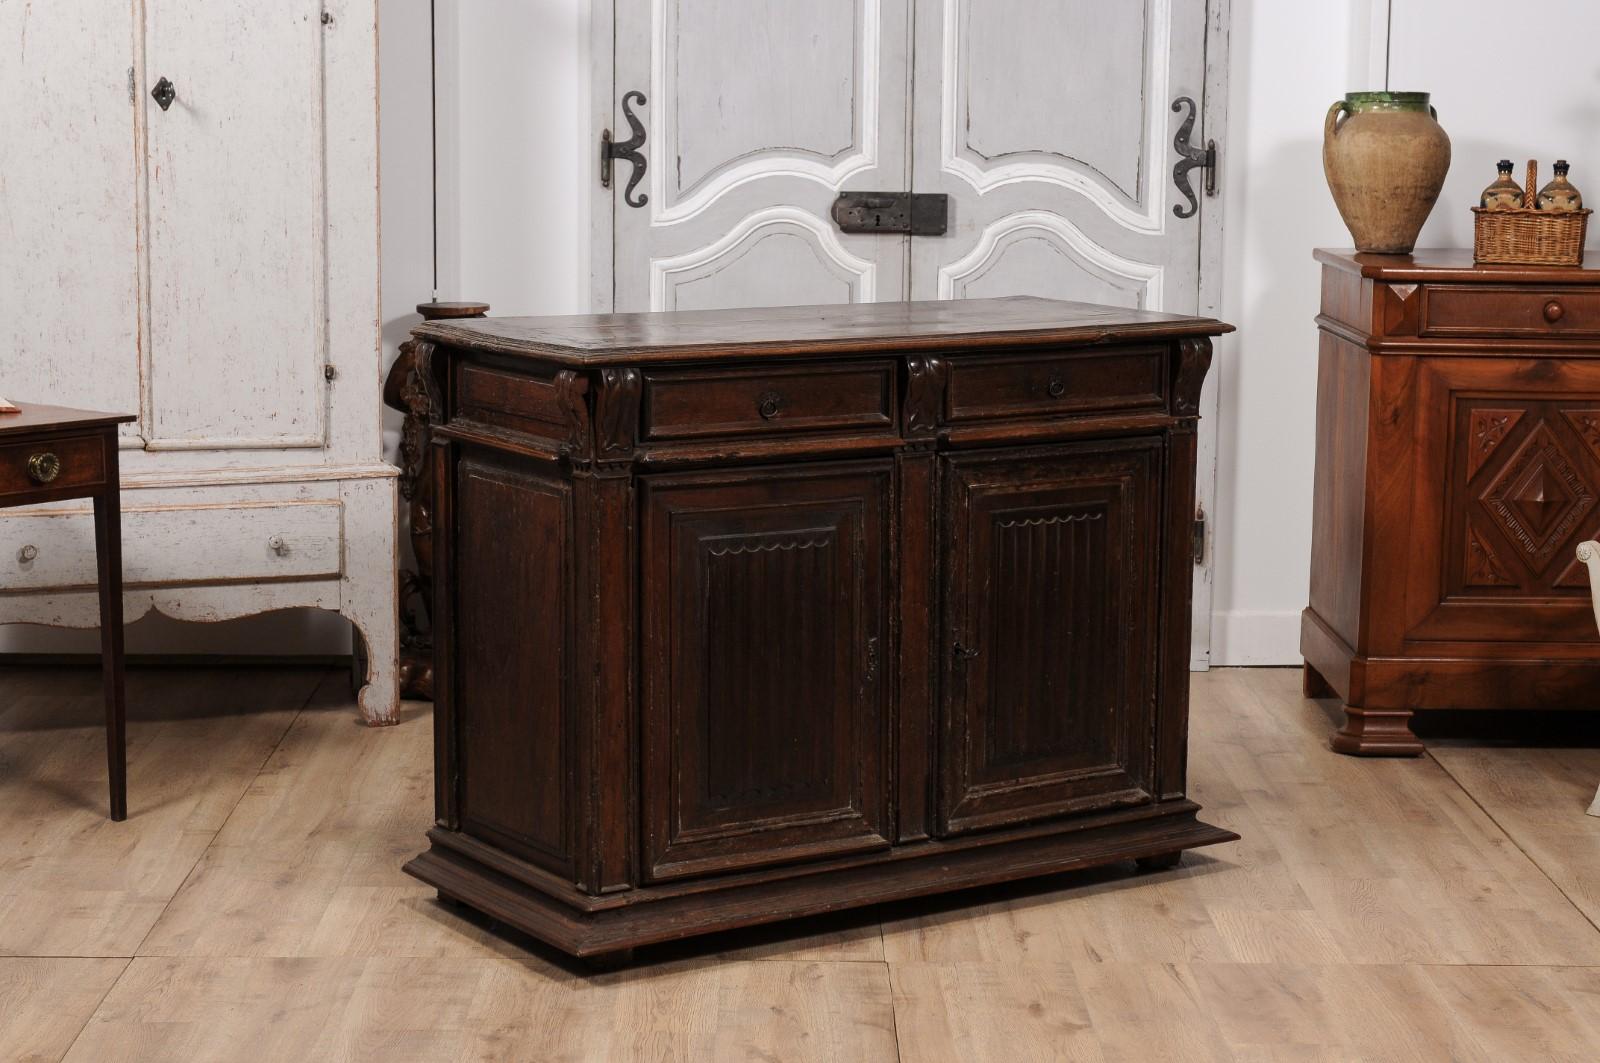 Renaissance French 16th Century Henri II Period Walnut Buffet with Folded Cloth Ornaments For Sale